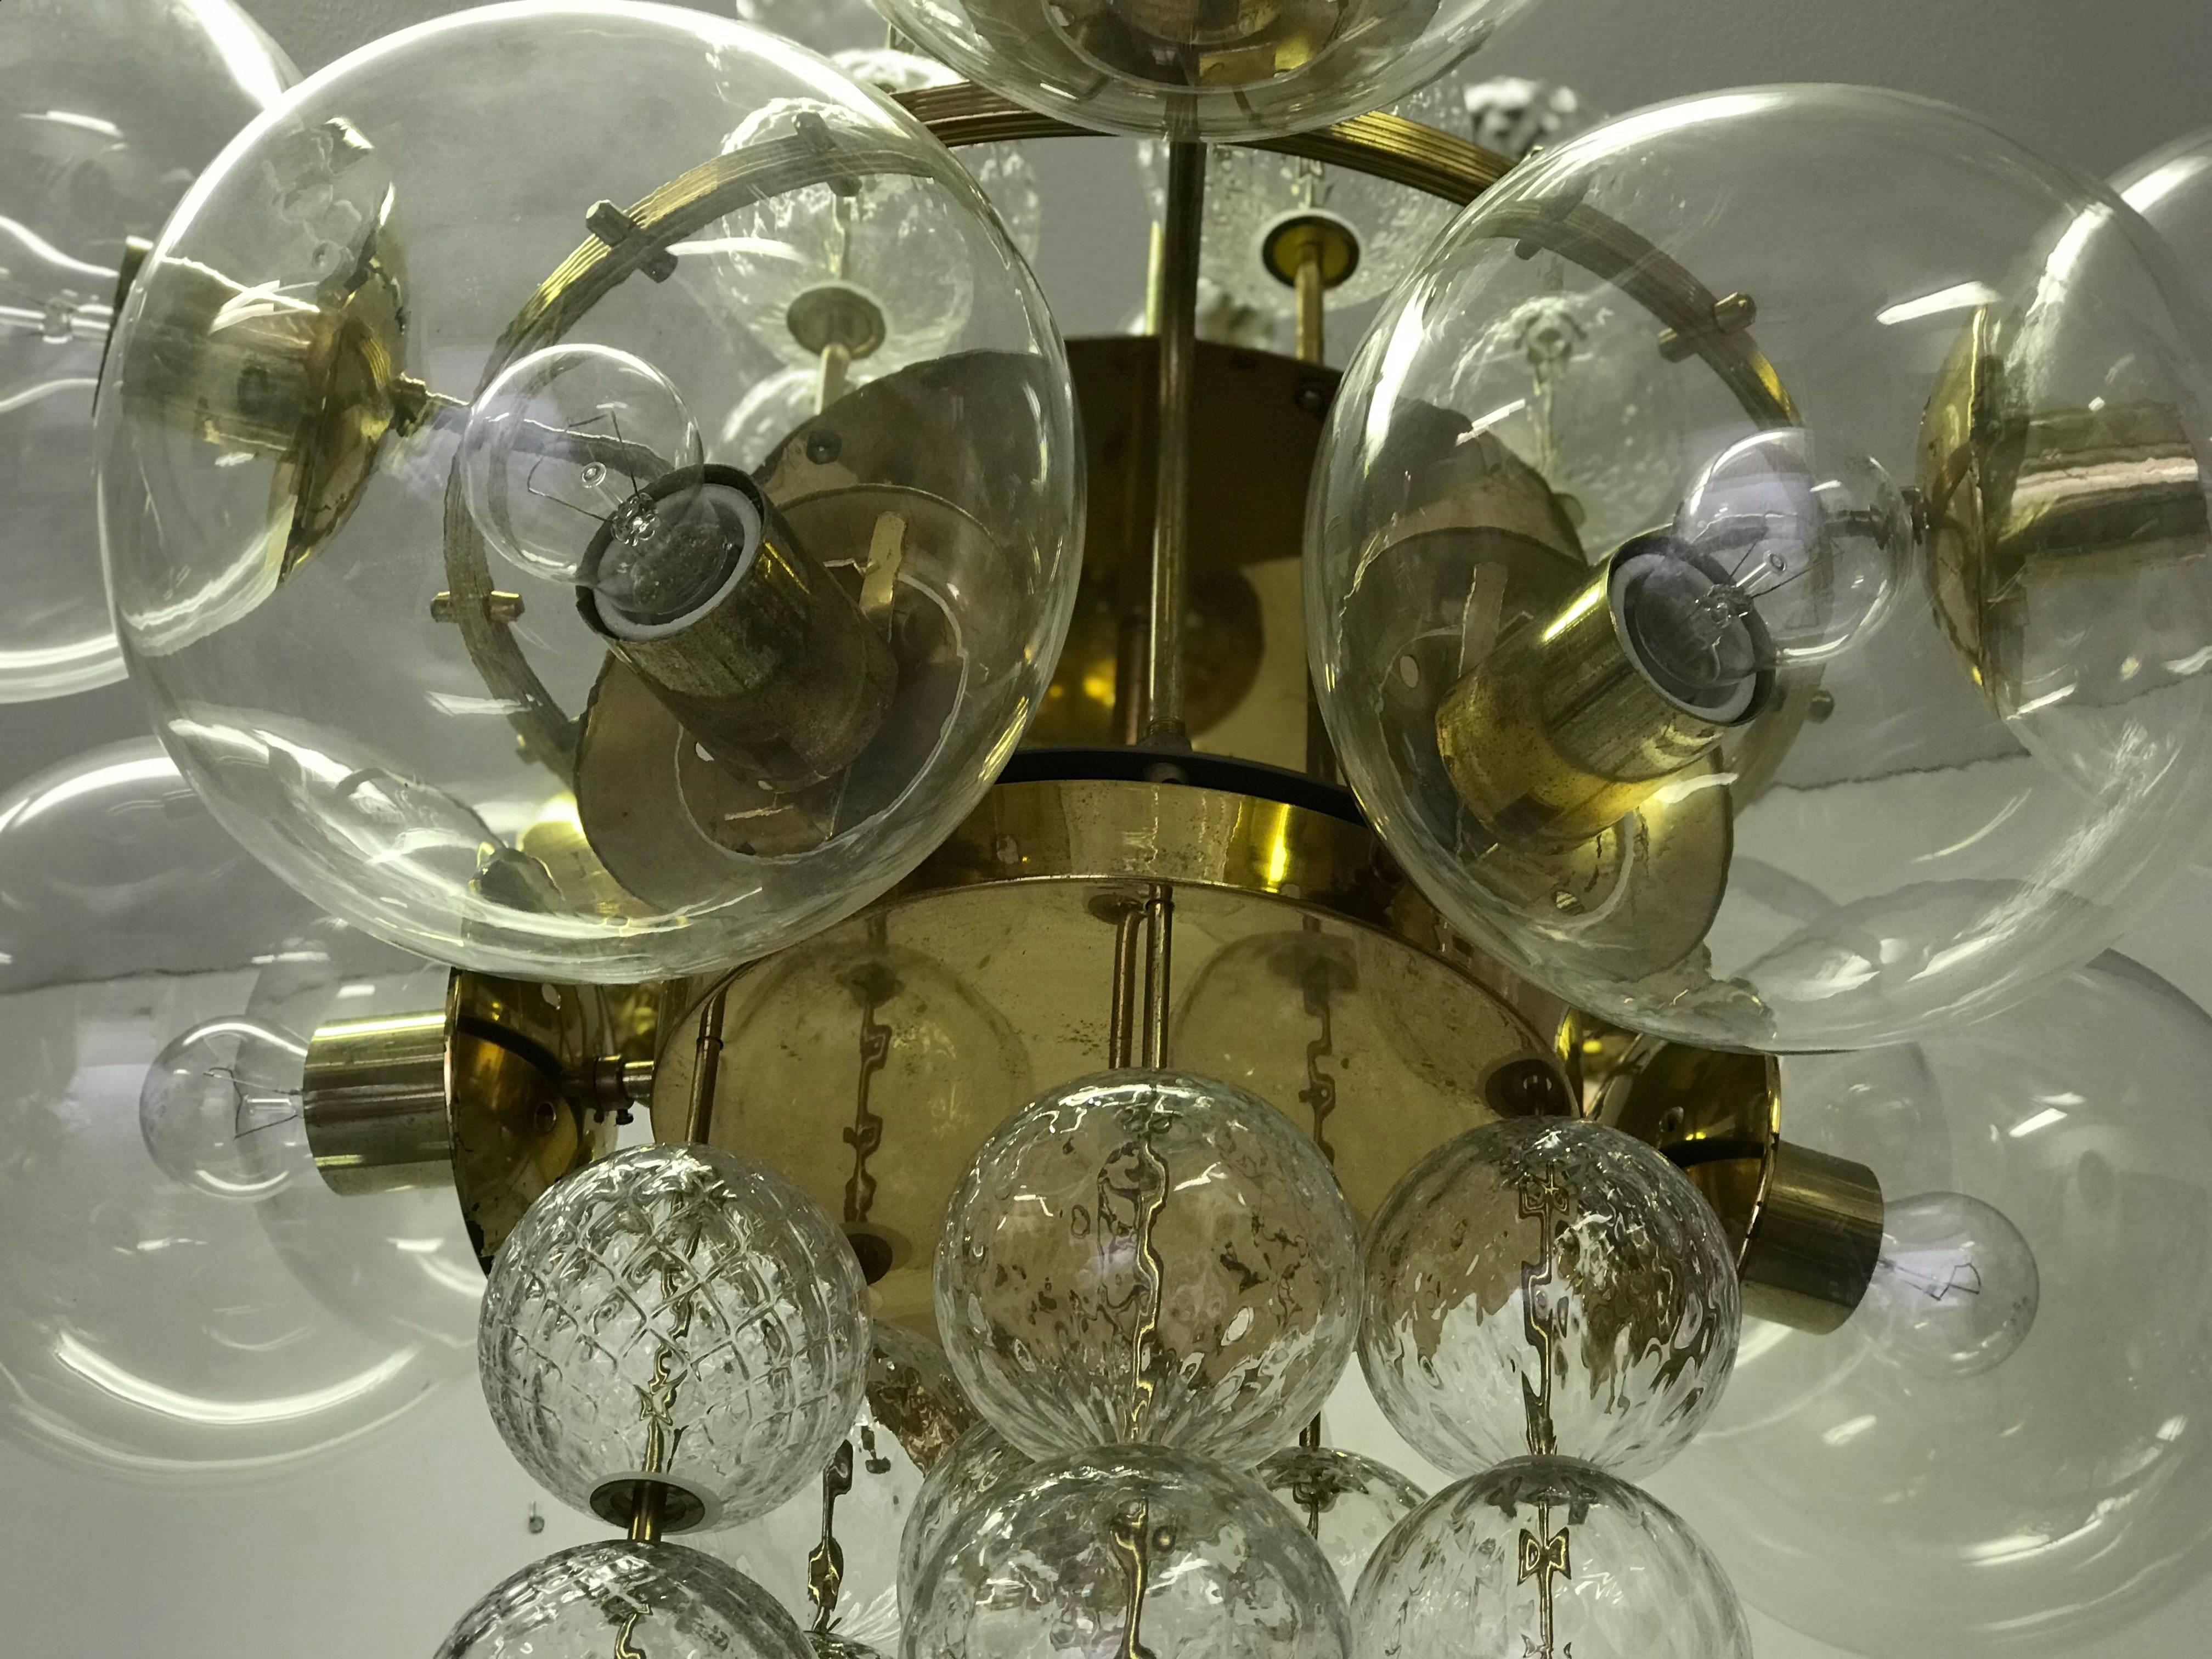 An unique chandelier from the 1965s. The brass construction is completed with the original patina. The glass balls are hand-blown. The conditions is very nice. The chandelier is fitted with ten glass spheres of 22 cm in diameter. Each arm has an